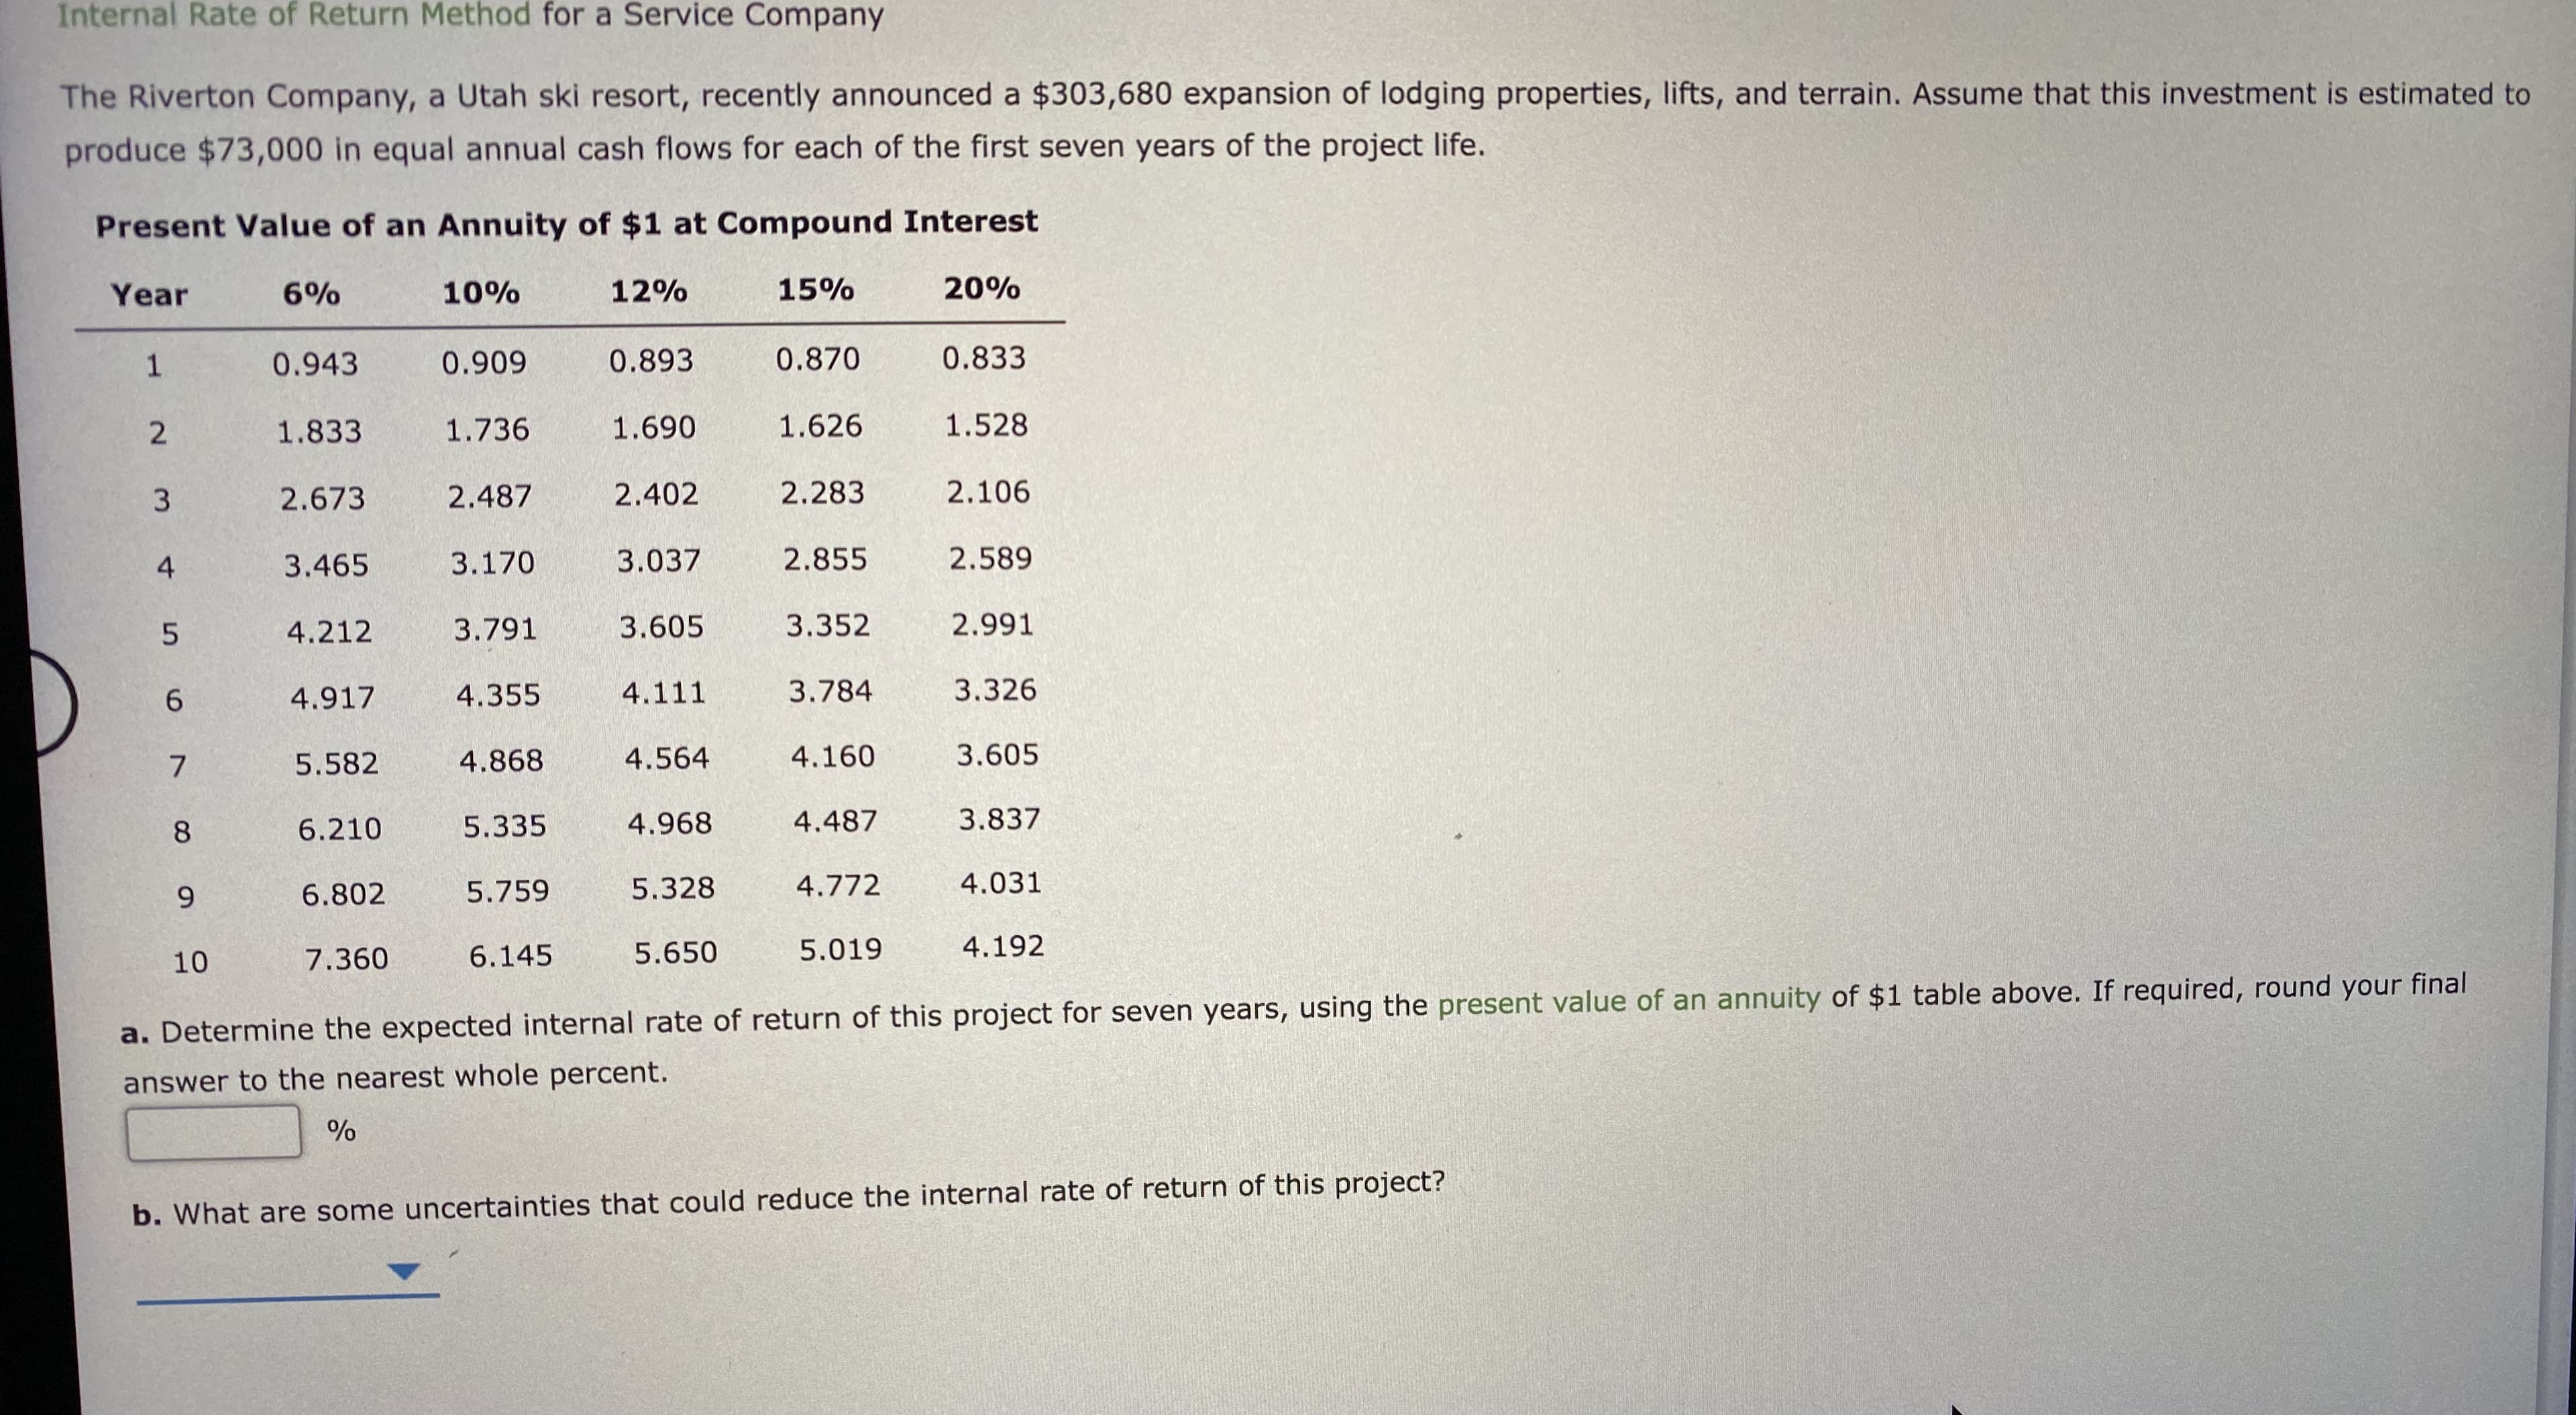 a. Determine the expected internal rate of return of this project for seven years, using the present value of an annuity of $1 table above. If required, round youP Pinal
answer to the nearest whole percent.
b. What are some uncertainties that could reduce the internal rate of return of this project?
